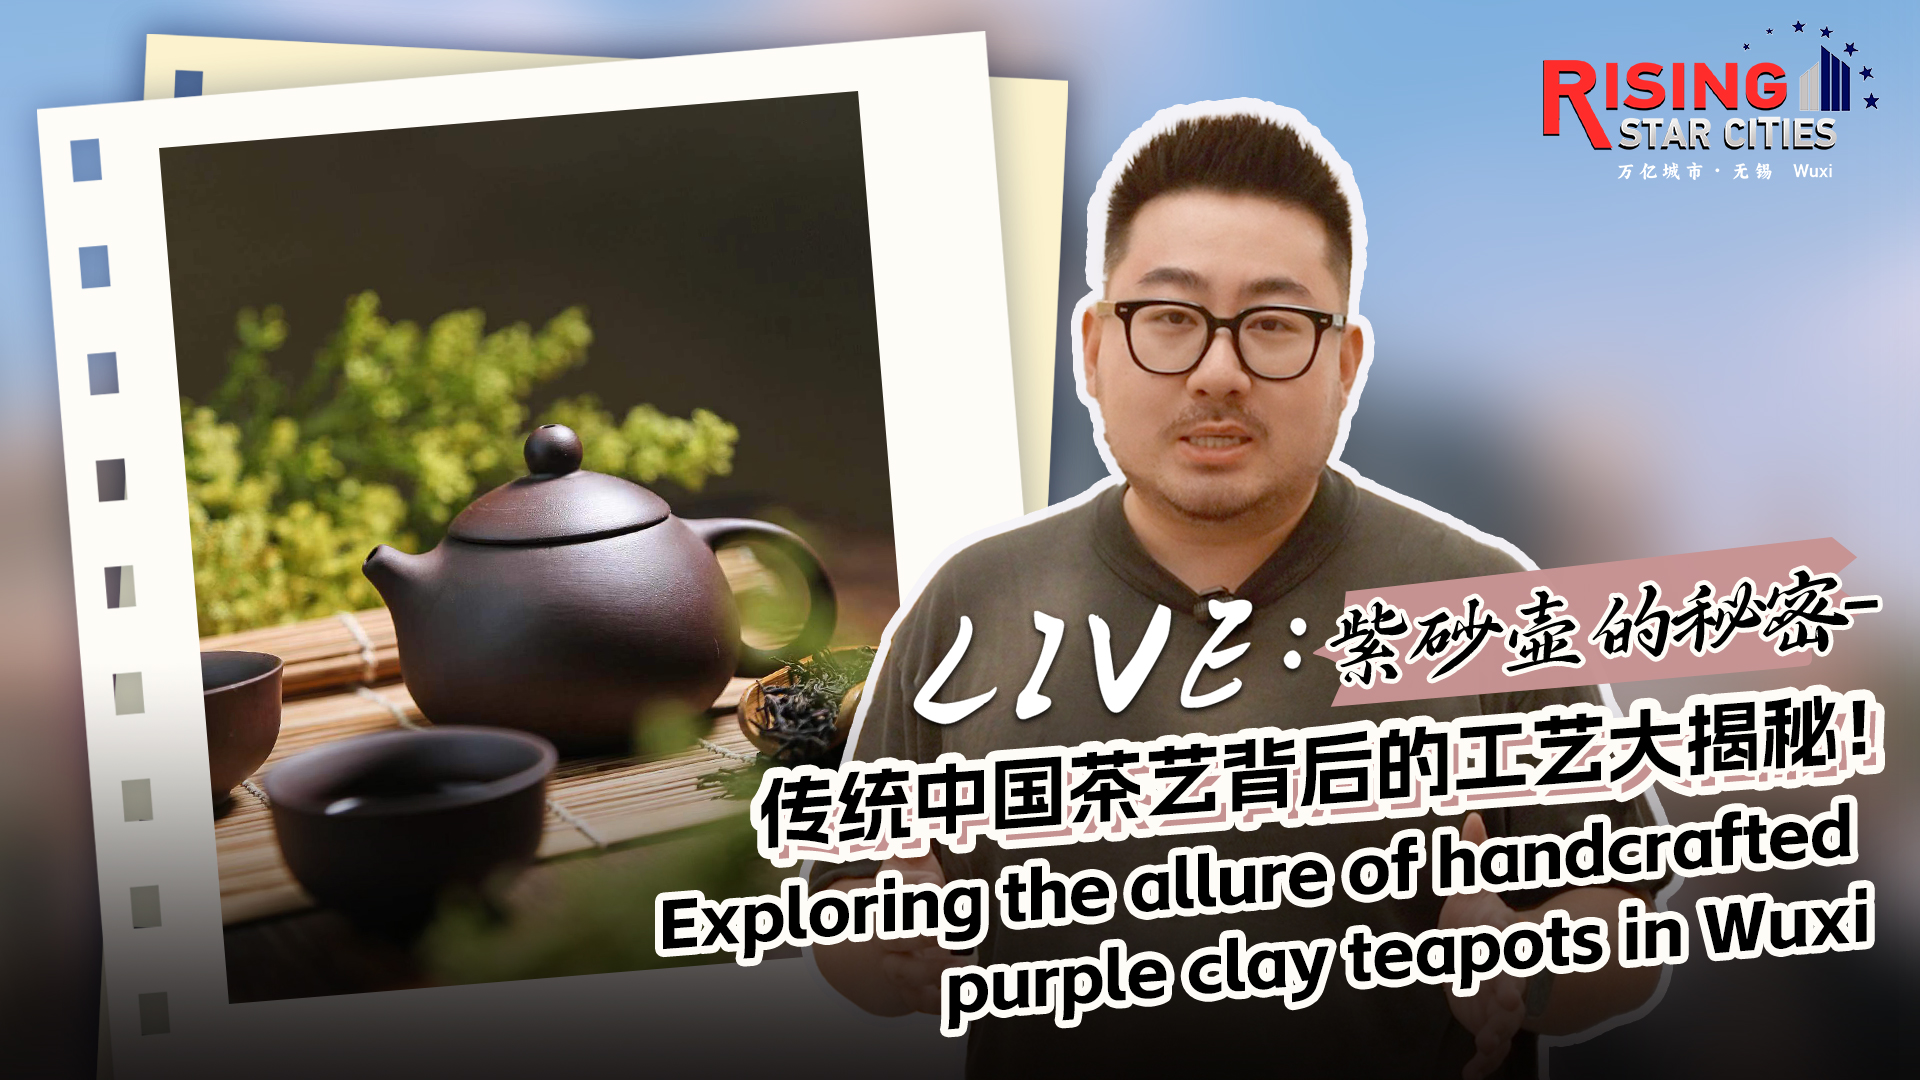 Live: Exploring the allure of handcrafted purple clay teapots in Wuxi